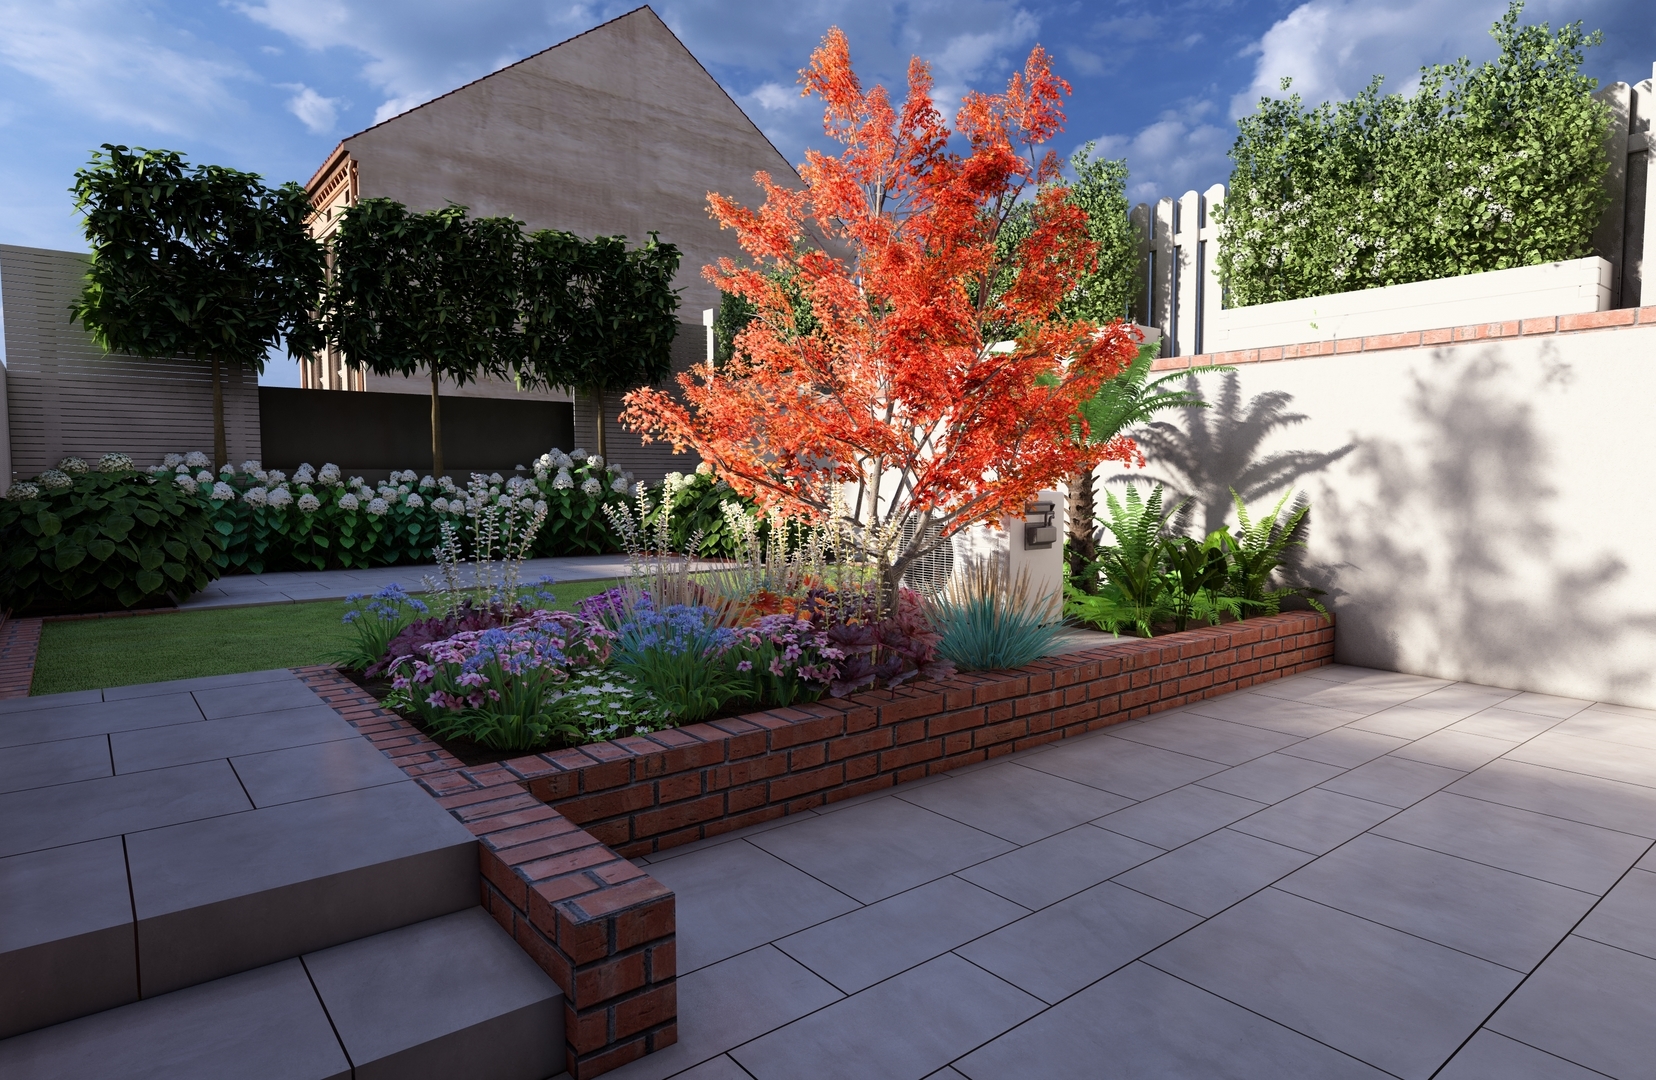 Garden Design for a modest size new split level garden in Kimmage, Dublin 6W with emphasis on a natural outdoor area with modest grass lawn area and plenty of colourful seasonal plant displays throughout the year.